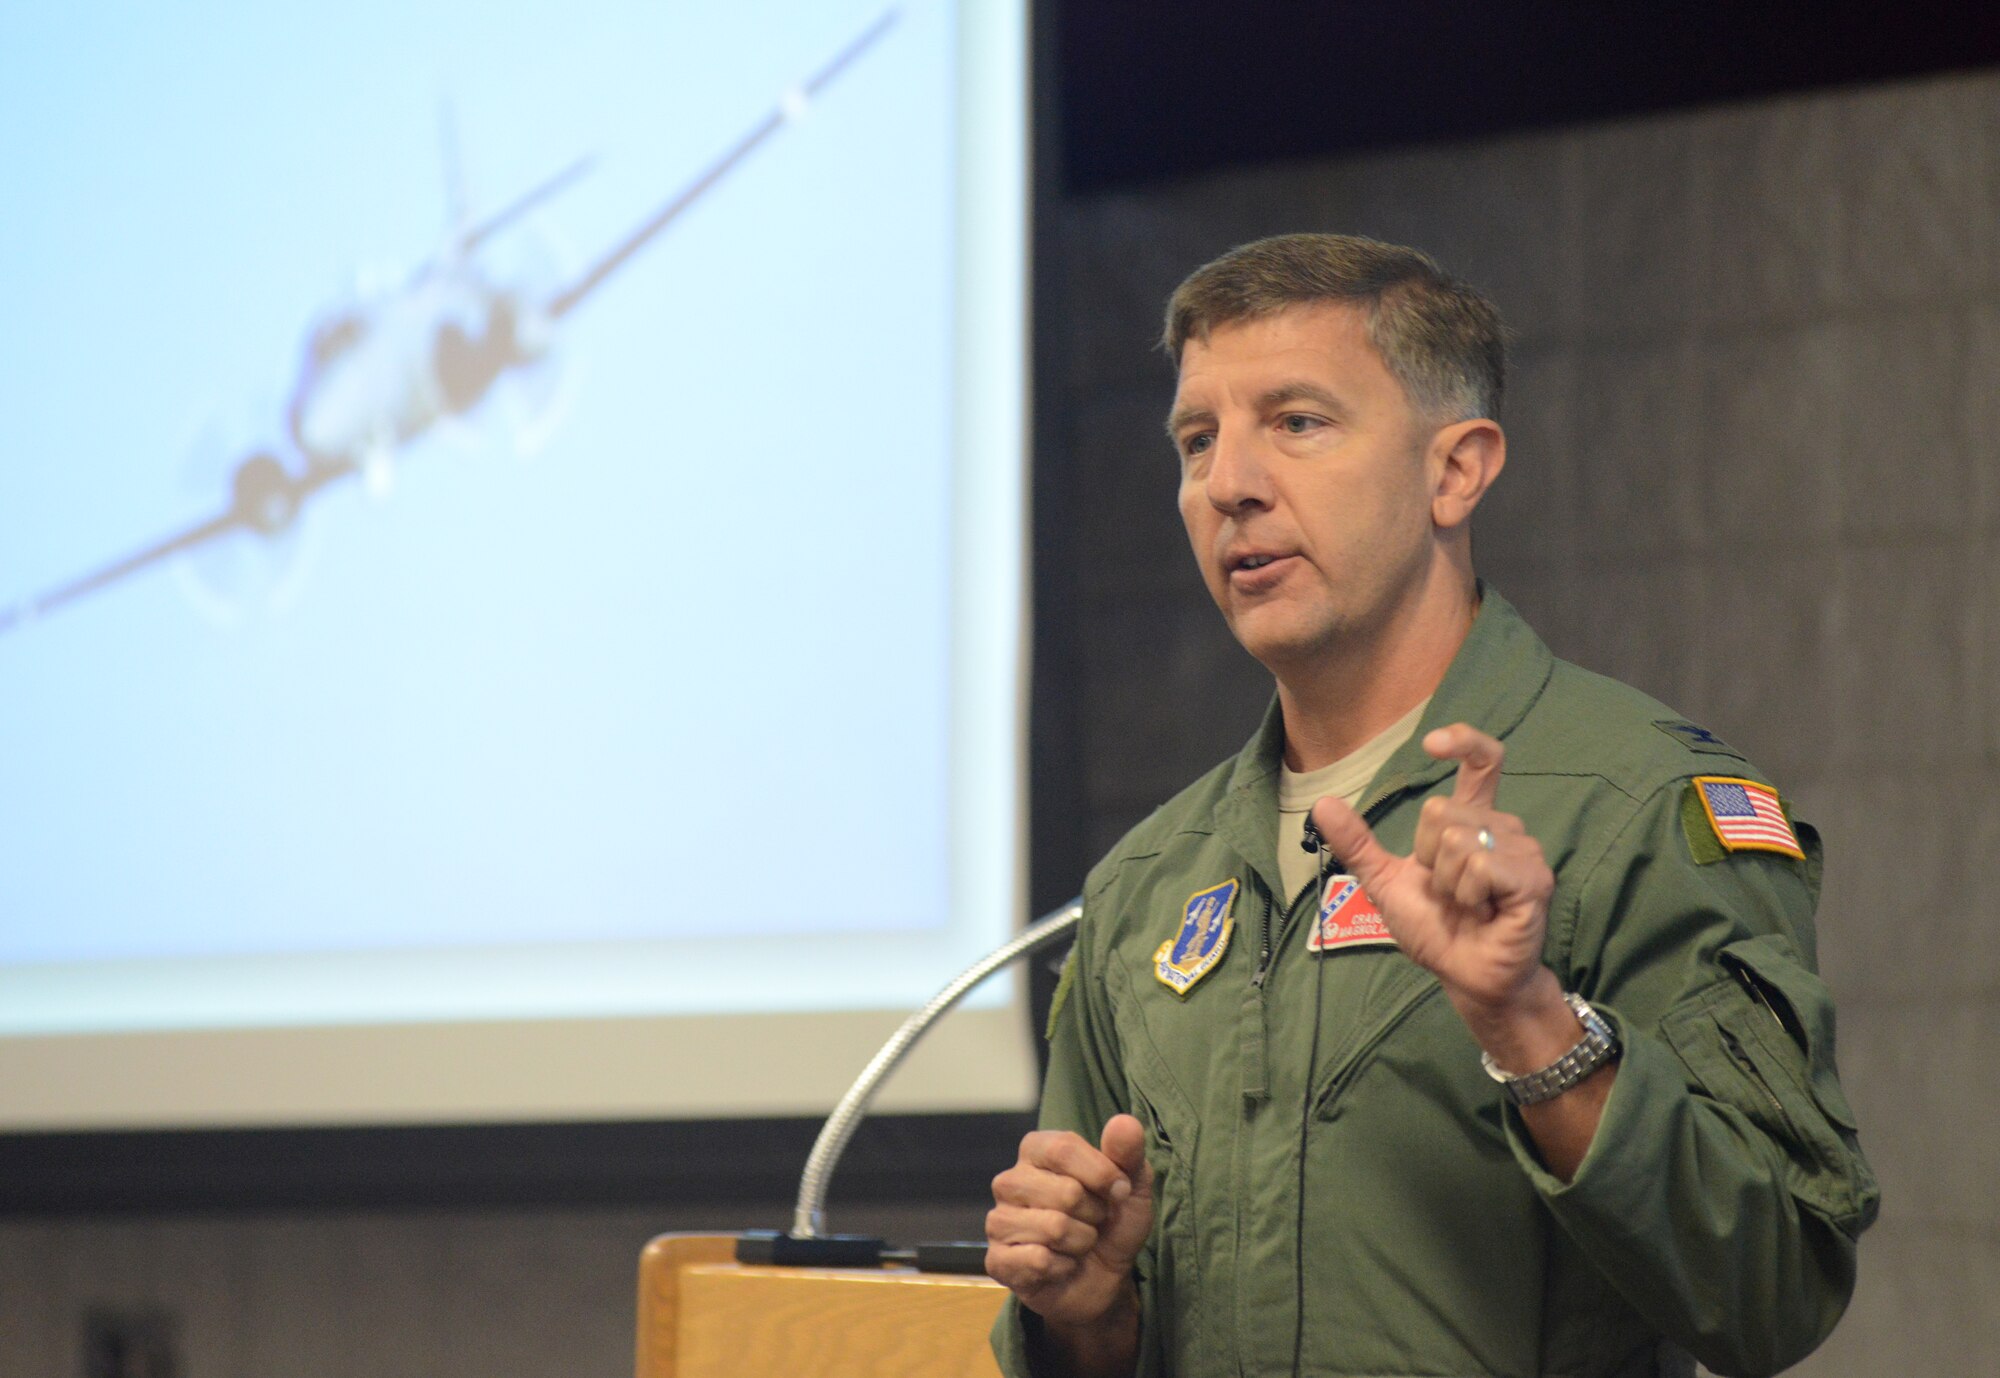 Col. Craig Ziemba, director of joint operations, Mississippi National Guard, discusses the Mississippi's manned intelligence, surveillance and reconnaissance program during the 2015 Air National Guard Executive Safety Summit at Volk Field Combat Readiness Training Center, Wisconsin, May 5, 2015. The conference covers a wide range of topics for ANG senior leaders including safety, resilience, mishap prevention and training. (US Air National Guard photo by Staff Sgt. John E. Hillier/RELEASED)